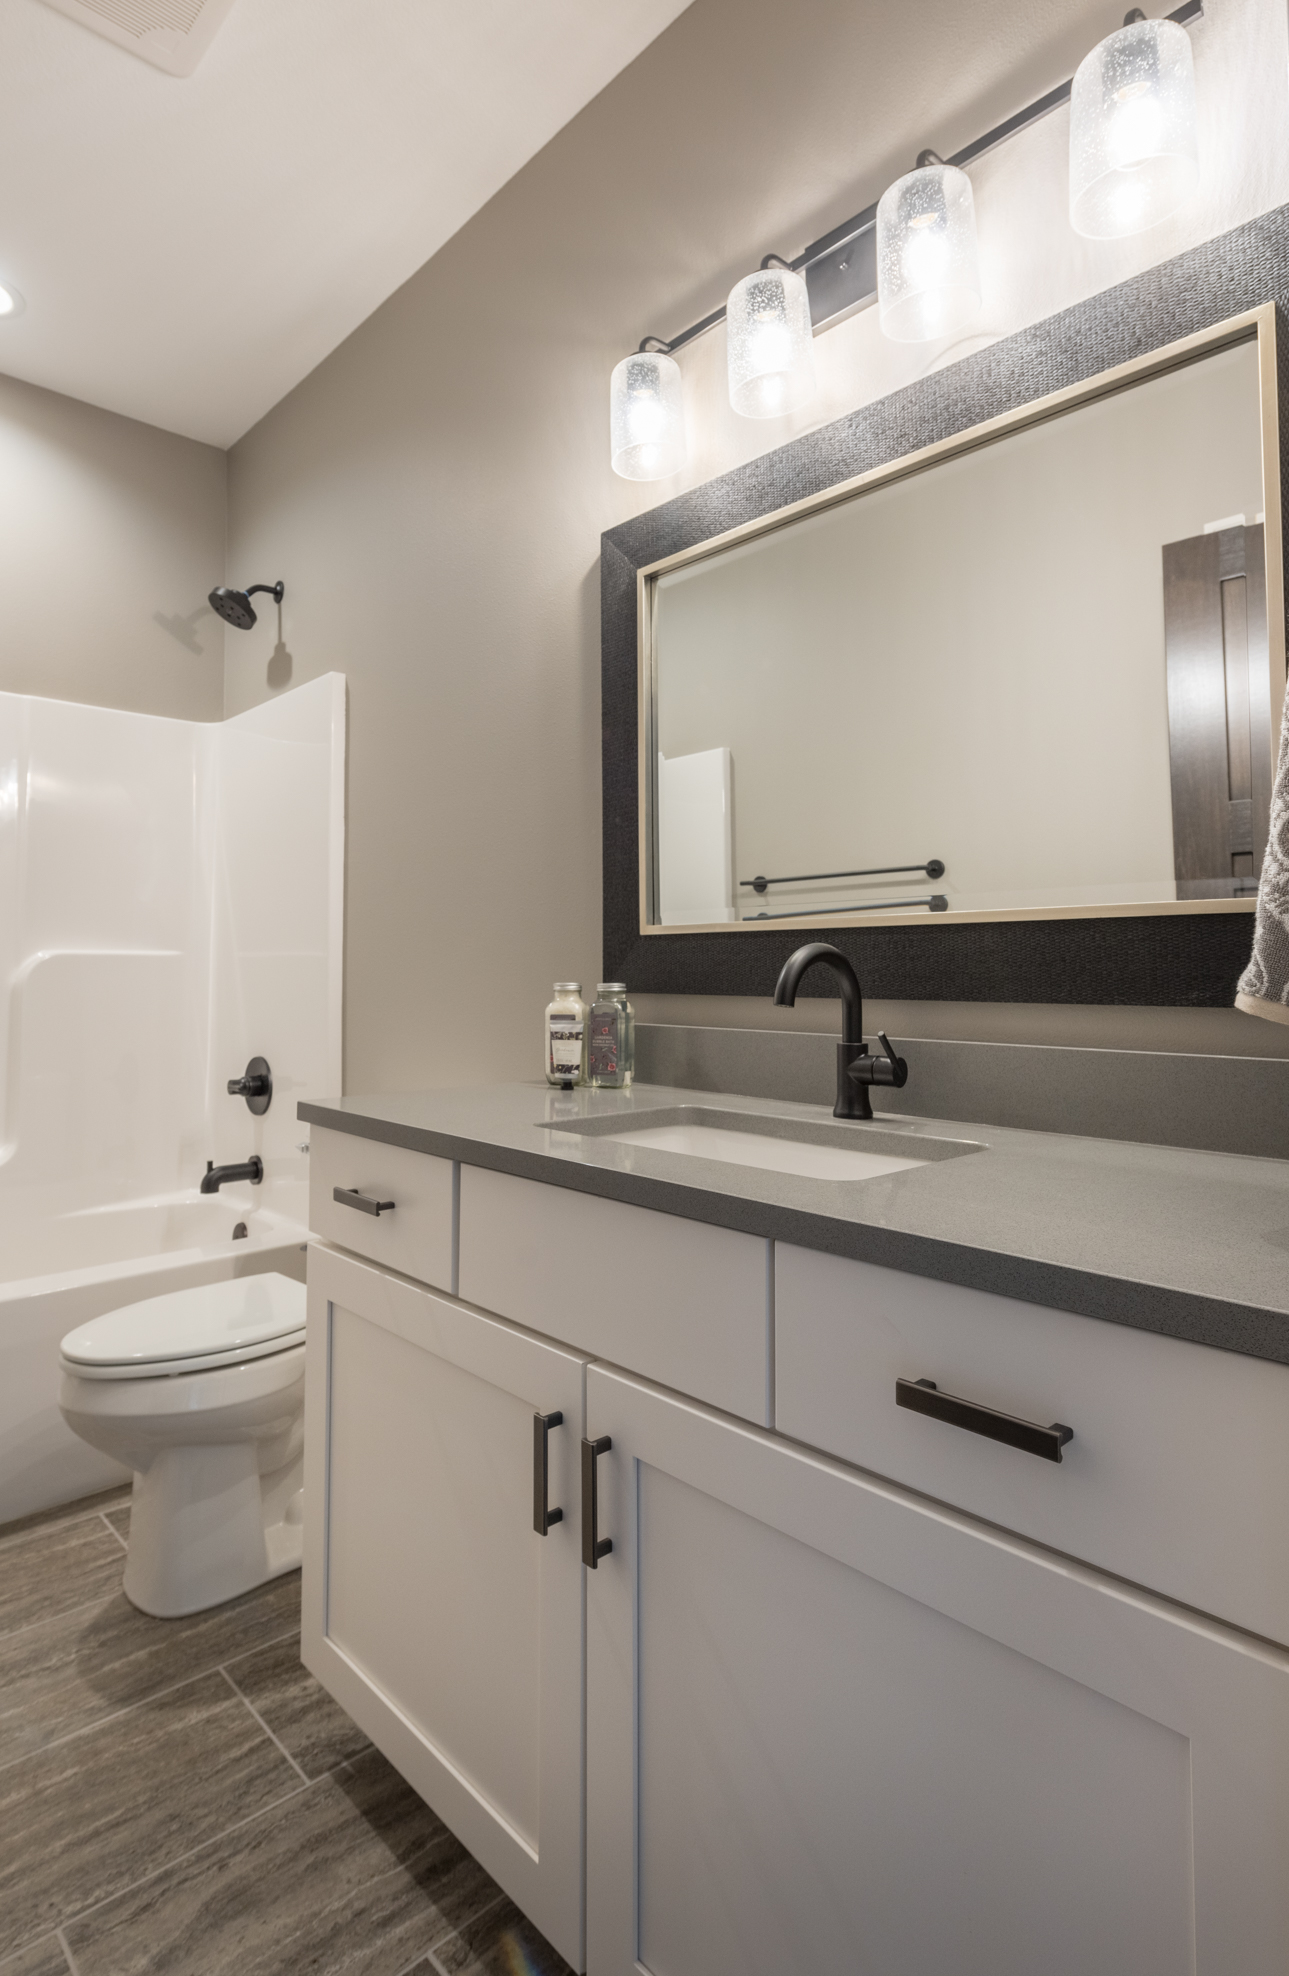 Cabinet Installation - Bathroom with white cabinetry, dark hardware, gray countertop and modern lighting fixtures